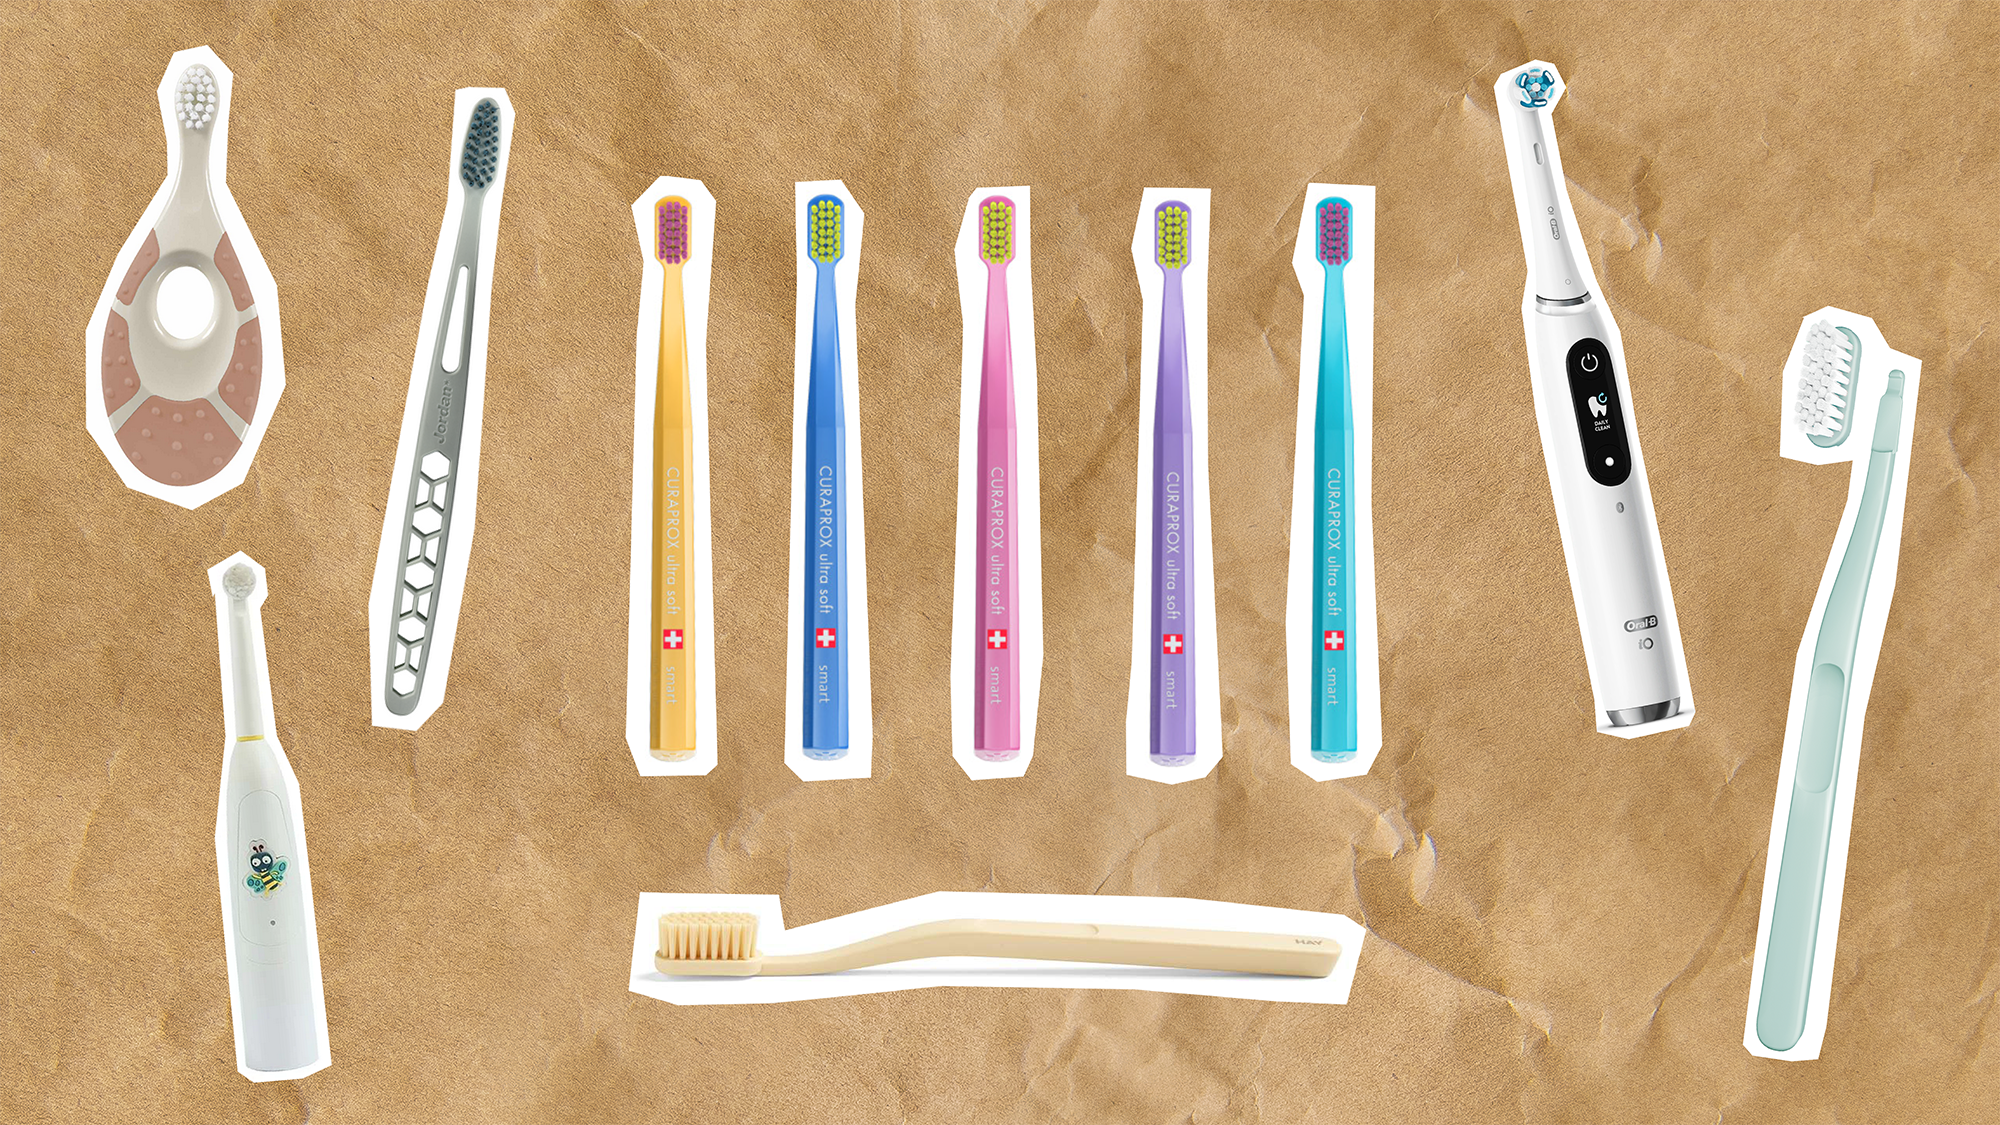 can a toothbrush be good and aesthetic pleasant at the same time?